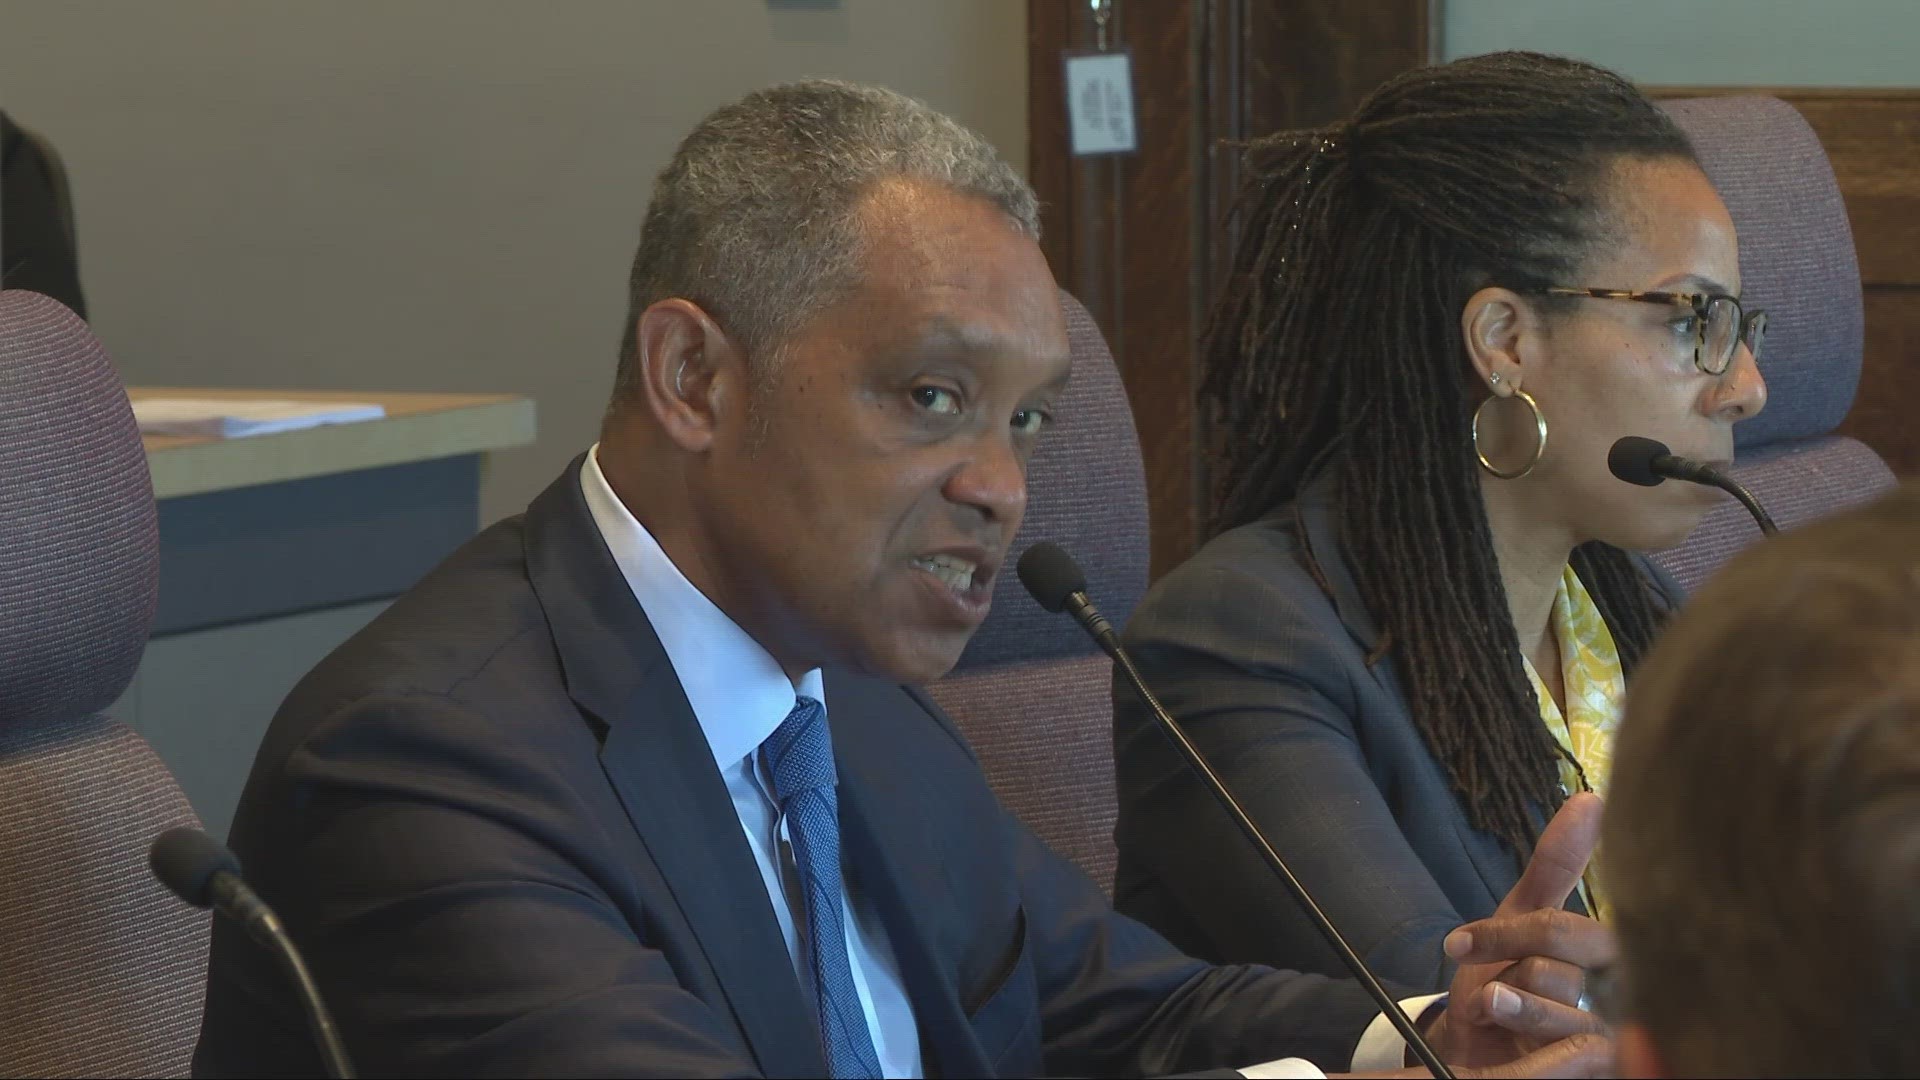 In a Wednesday Safety Committee meeting, councilmembers asked Karl Racine about progress the department has made since the decree was enacted eight years ago.